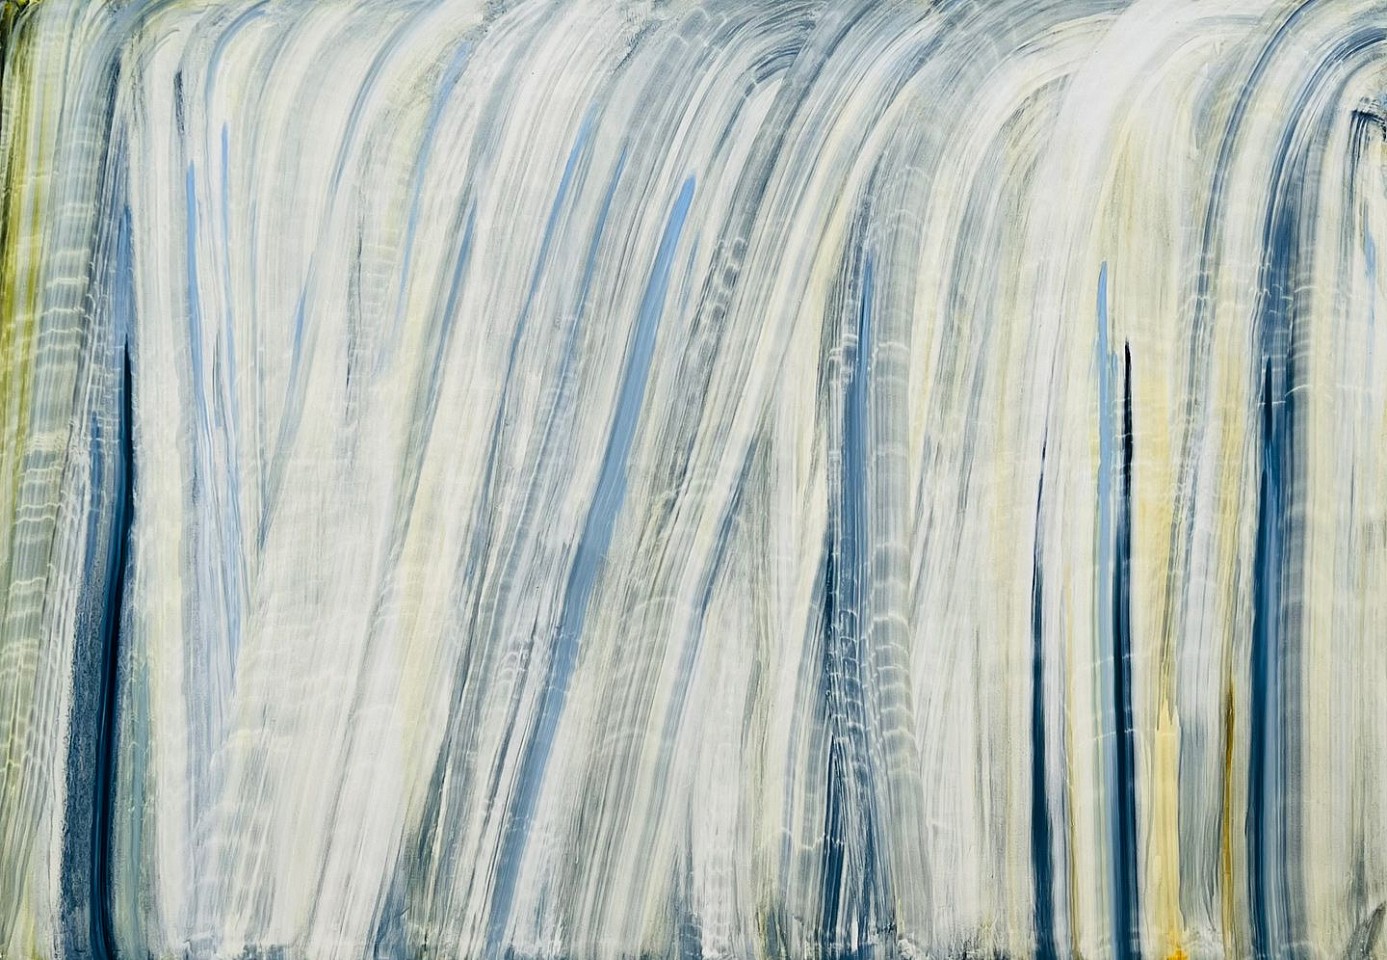 Fran O&#039;Neill
tidal, 2023
ONEI105
oil on canvas, 70 x 100 inches